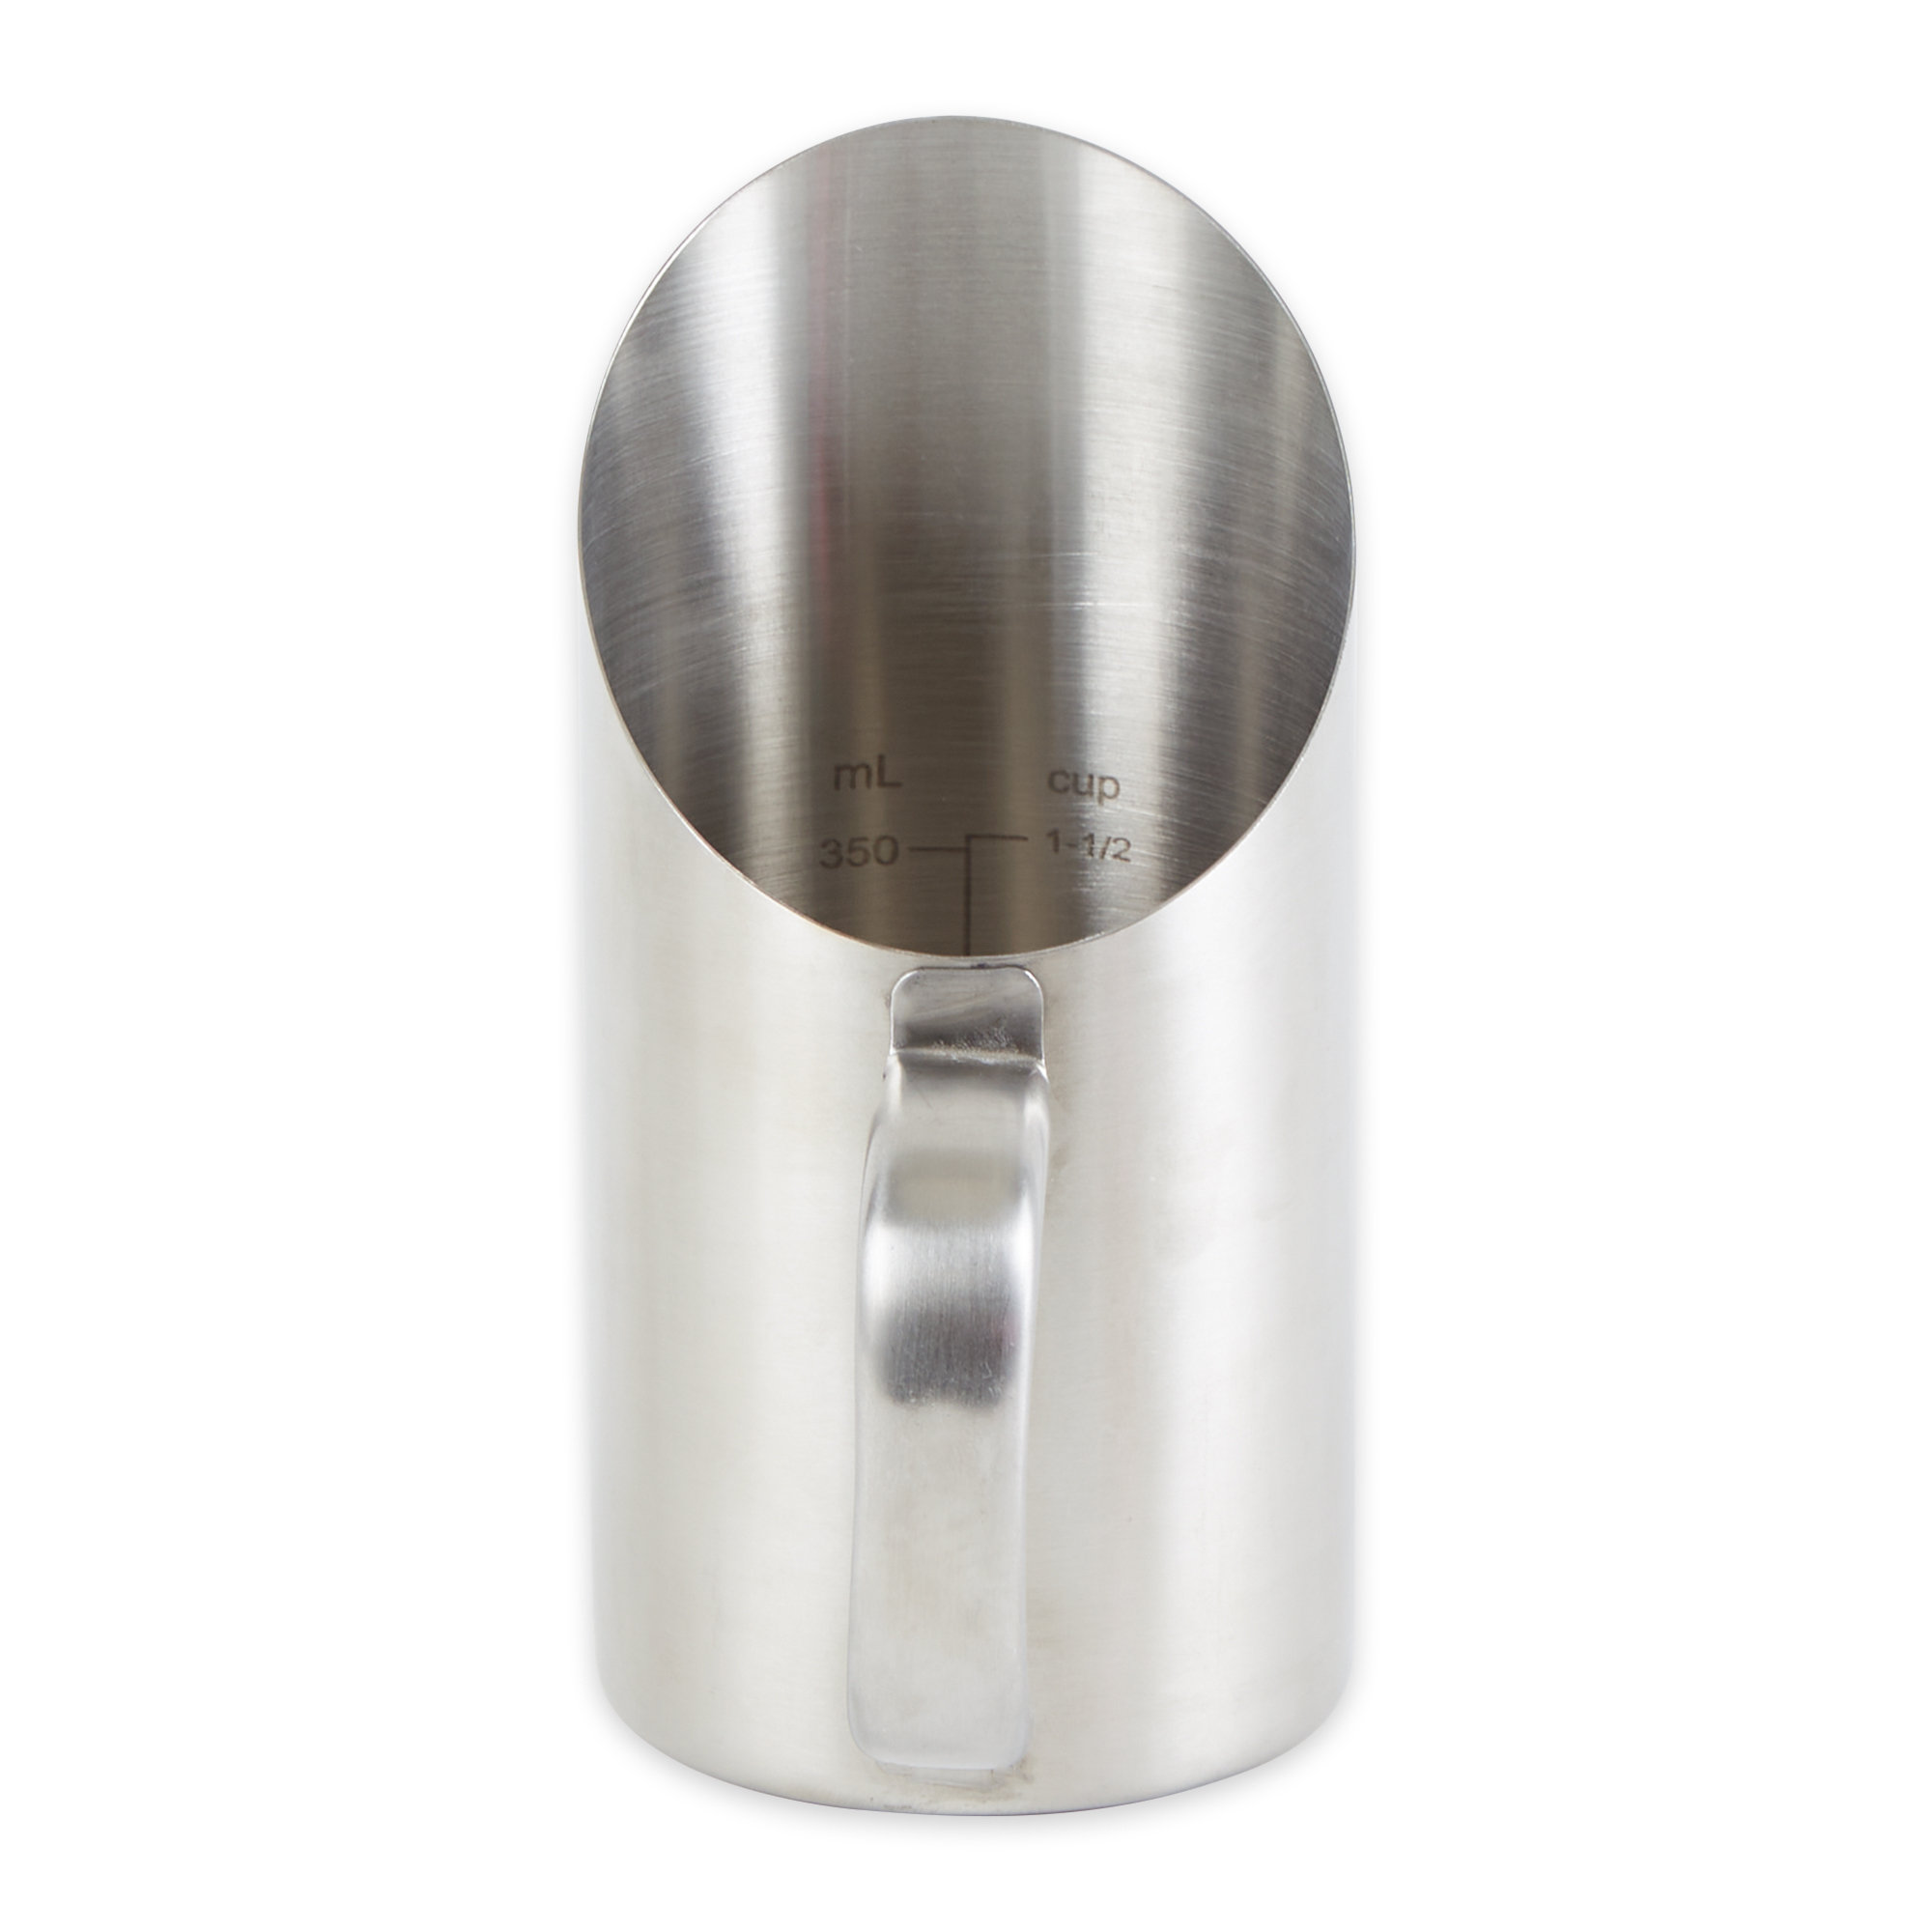 RSVP Endurance 1/2 Cup Measuring Cup Stainless Steel